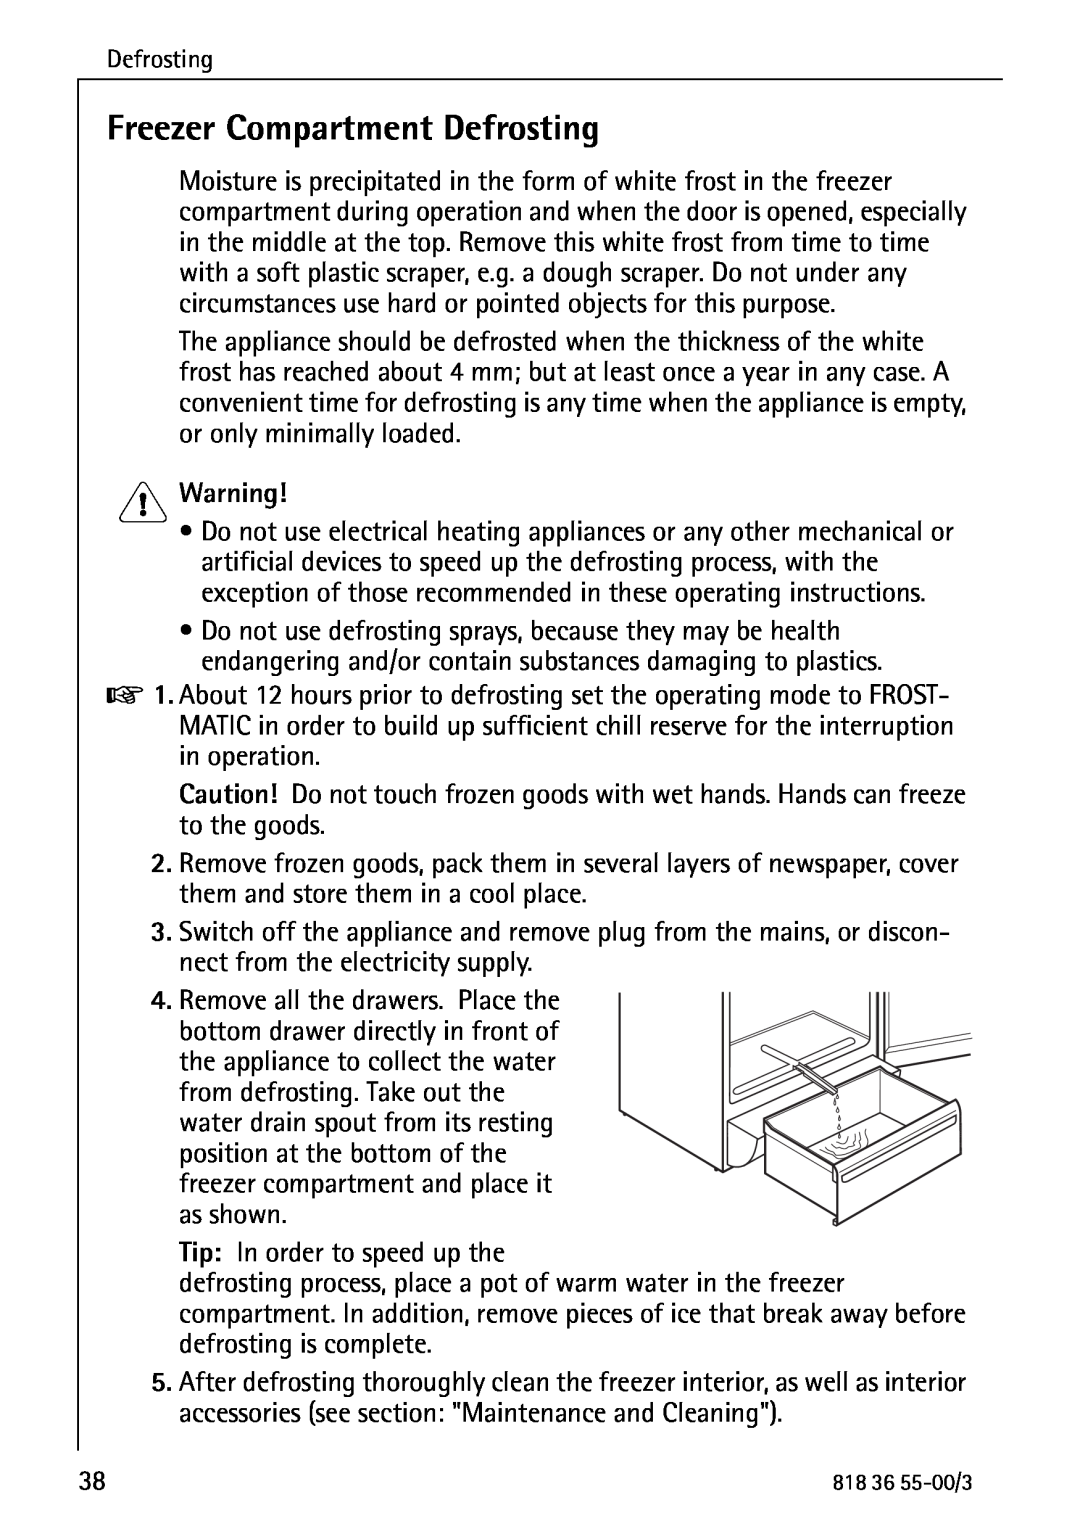 AEG 86378-KG operating instructions Freezer Compartment Defrosting 